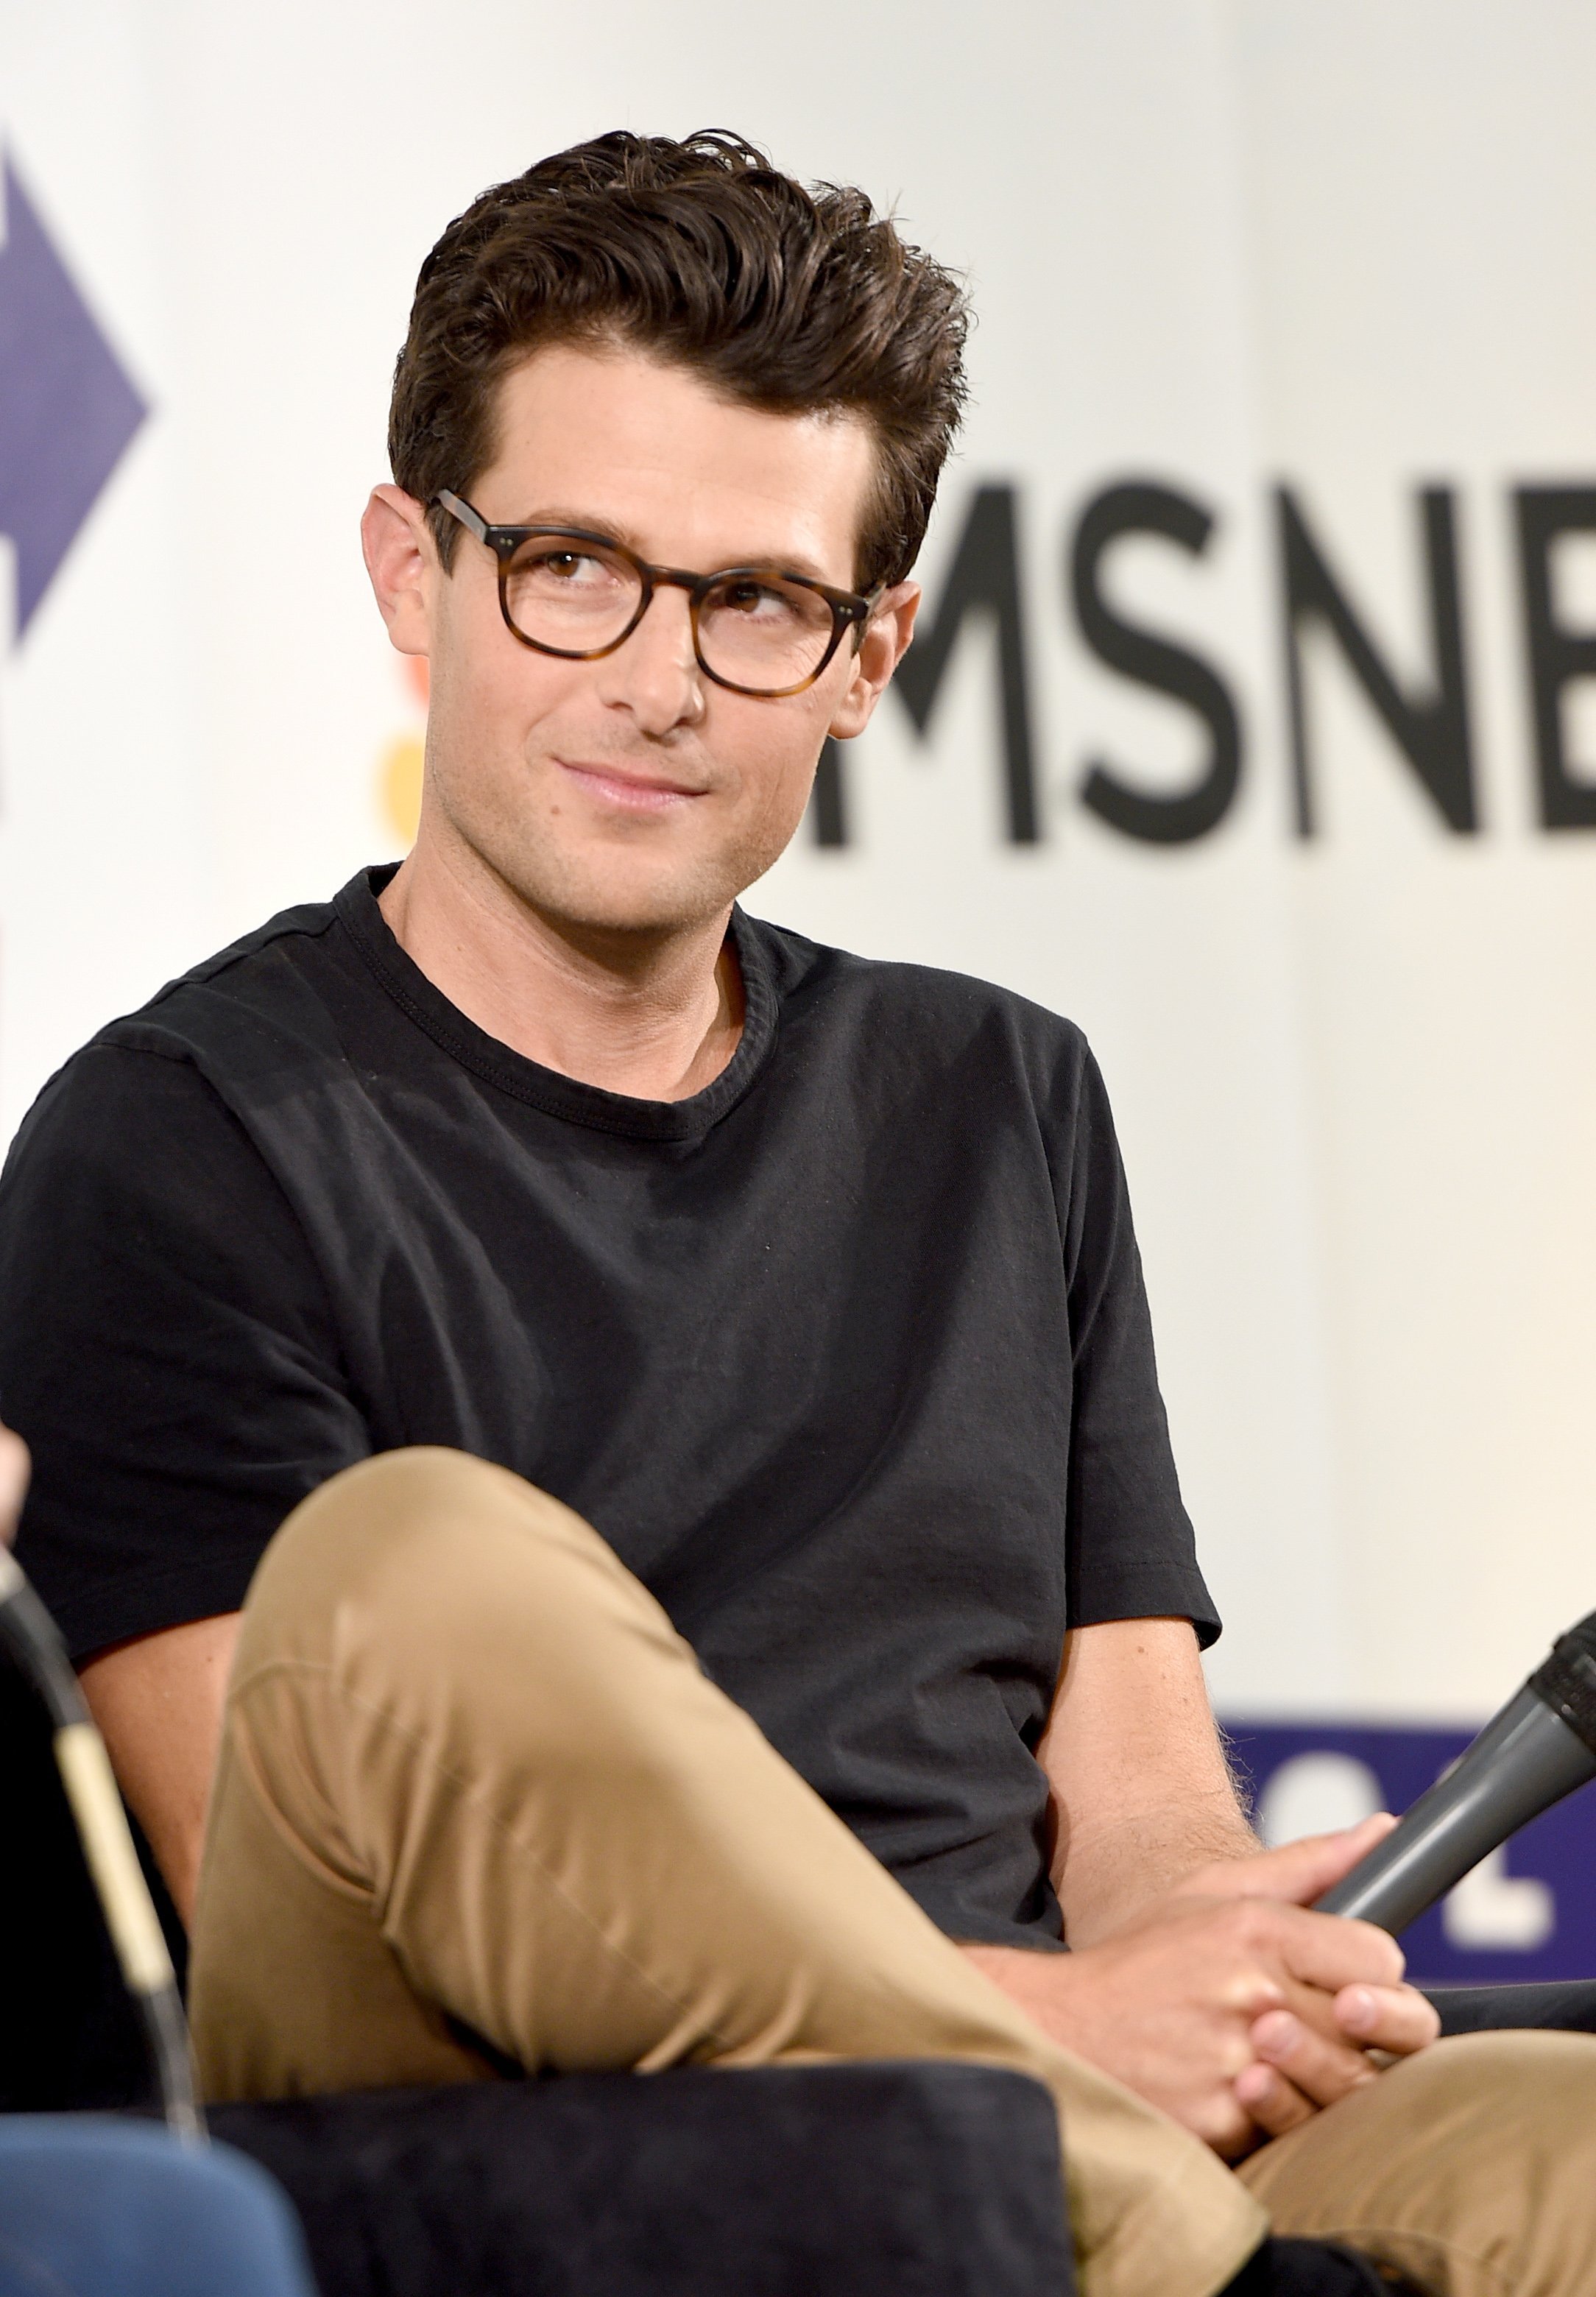 PASADENA, CA - JULY 30: Jacob Soboroff at the 'MSNBC: Lessons From The Road' panel during Politicon at Pasadena Convention Center on July 30, 2017 in Pasadena, California. (Photo by Joshua Blanchard/Getty Images for Politicon)